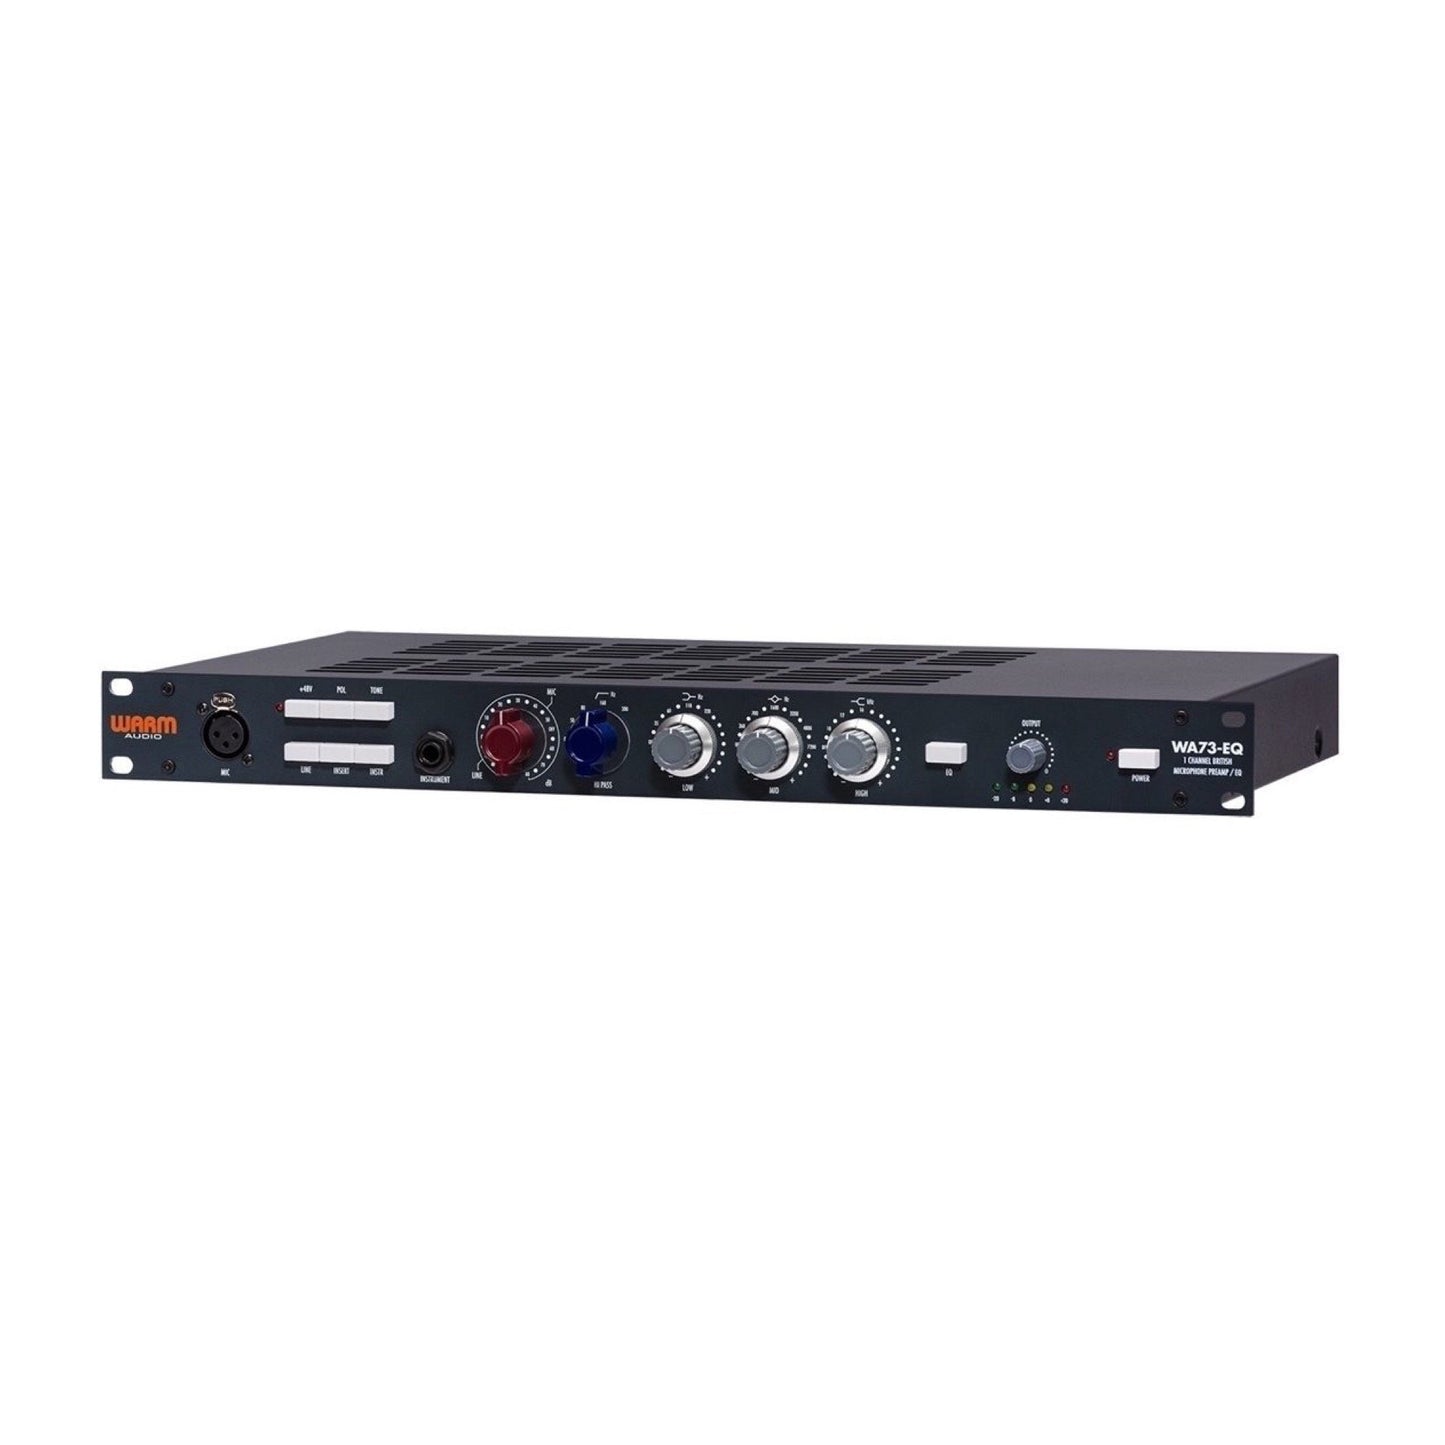 Warm Audio WA73-EQ 1073-Style Microphone Preamplifier and Equalizer